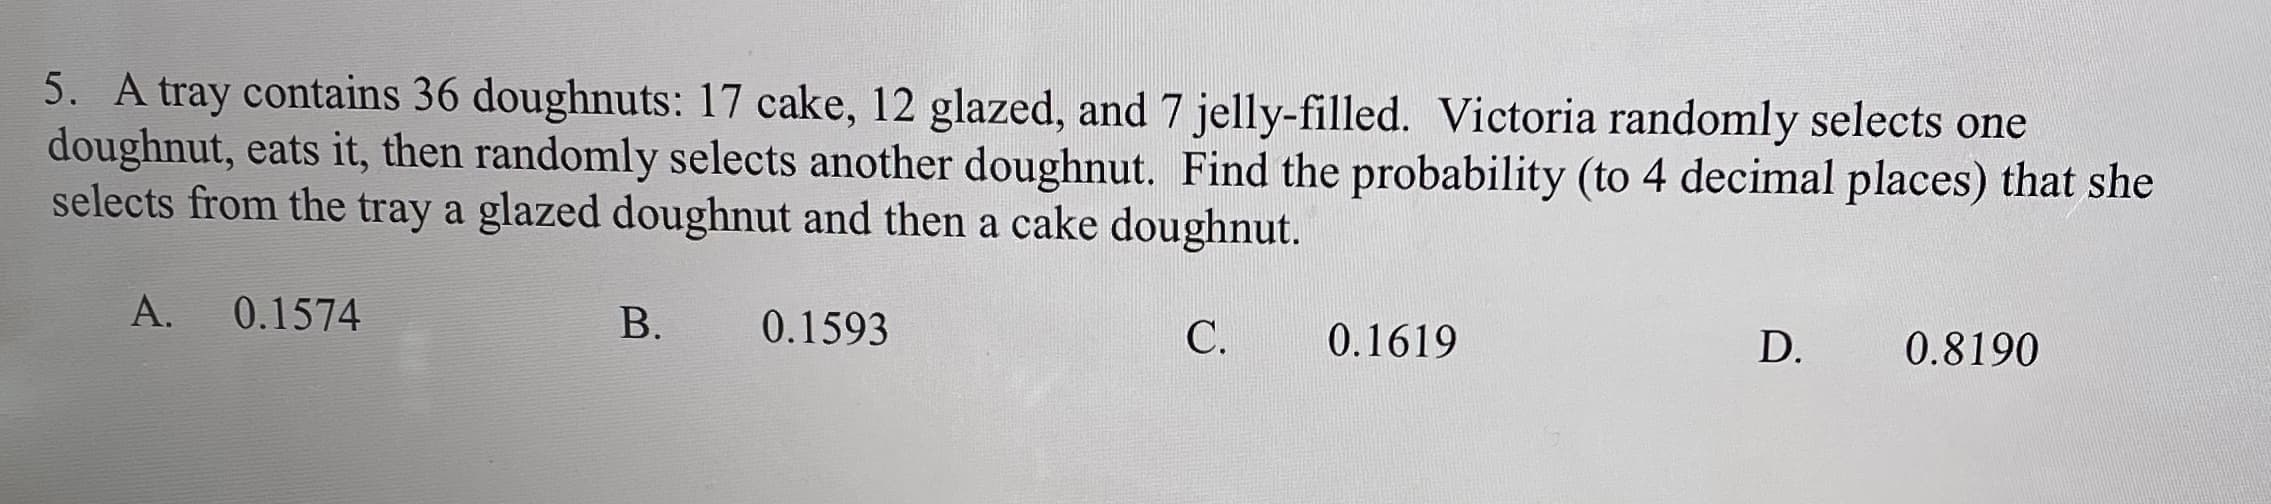 5. A tray contains 36 doughnuts: 17 cake, 12 glazed, and 7 jelly-filled. Victoria randomly selects one
doughnut, eats it, then randomly selects another doughnut. Find the probability (to 4 decimal places) that she
selects from the tray a glazed doughnut and then a cake doughnut.
A.
0.1574
B.
0.1593
C.
0.1619
D.
0.8190
